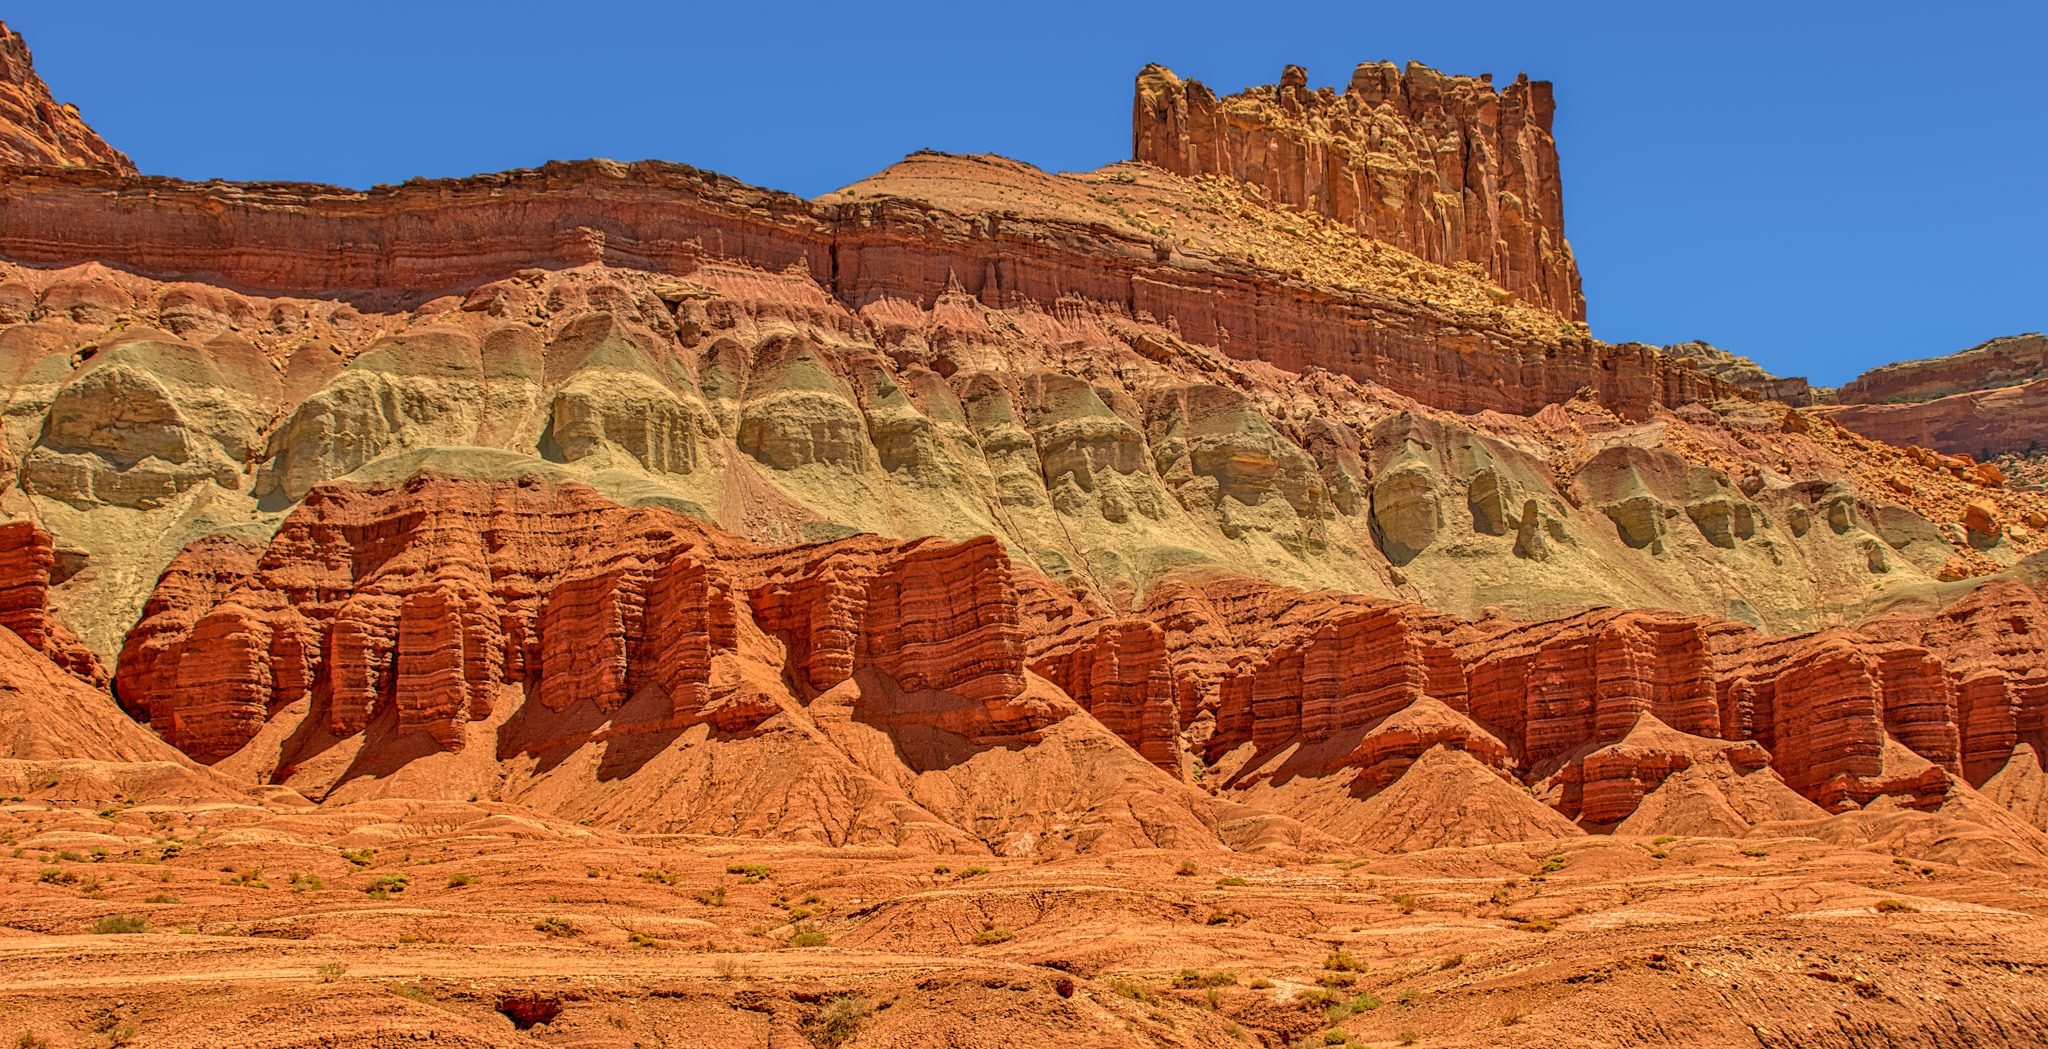 This is a view of the stratified rock formations along Utah State Route 24 in Capitol Reef National Park. From this vantage point, you can see the Moenkopi, Chinle, and Wingate Formations.